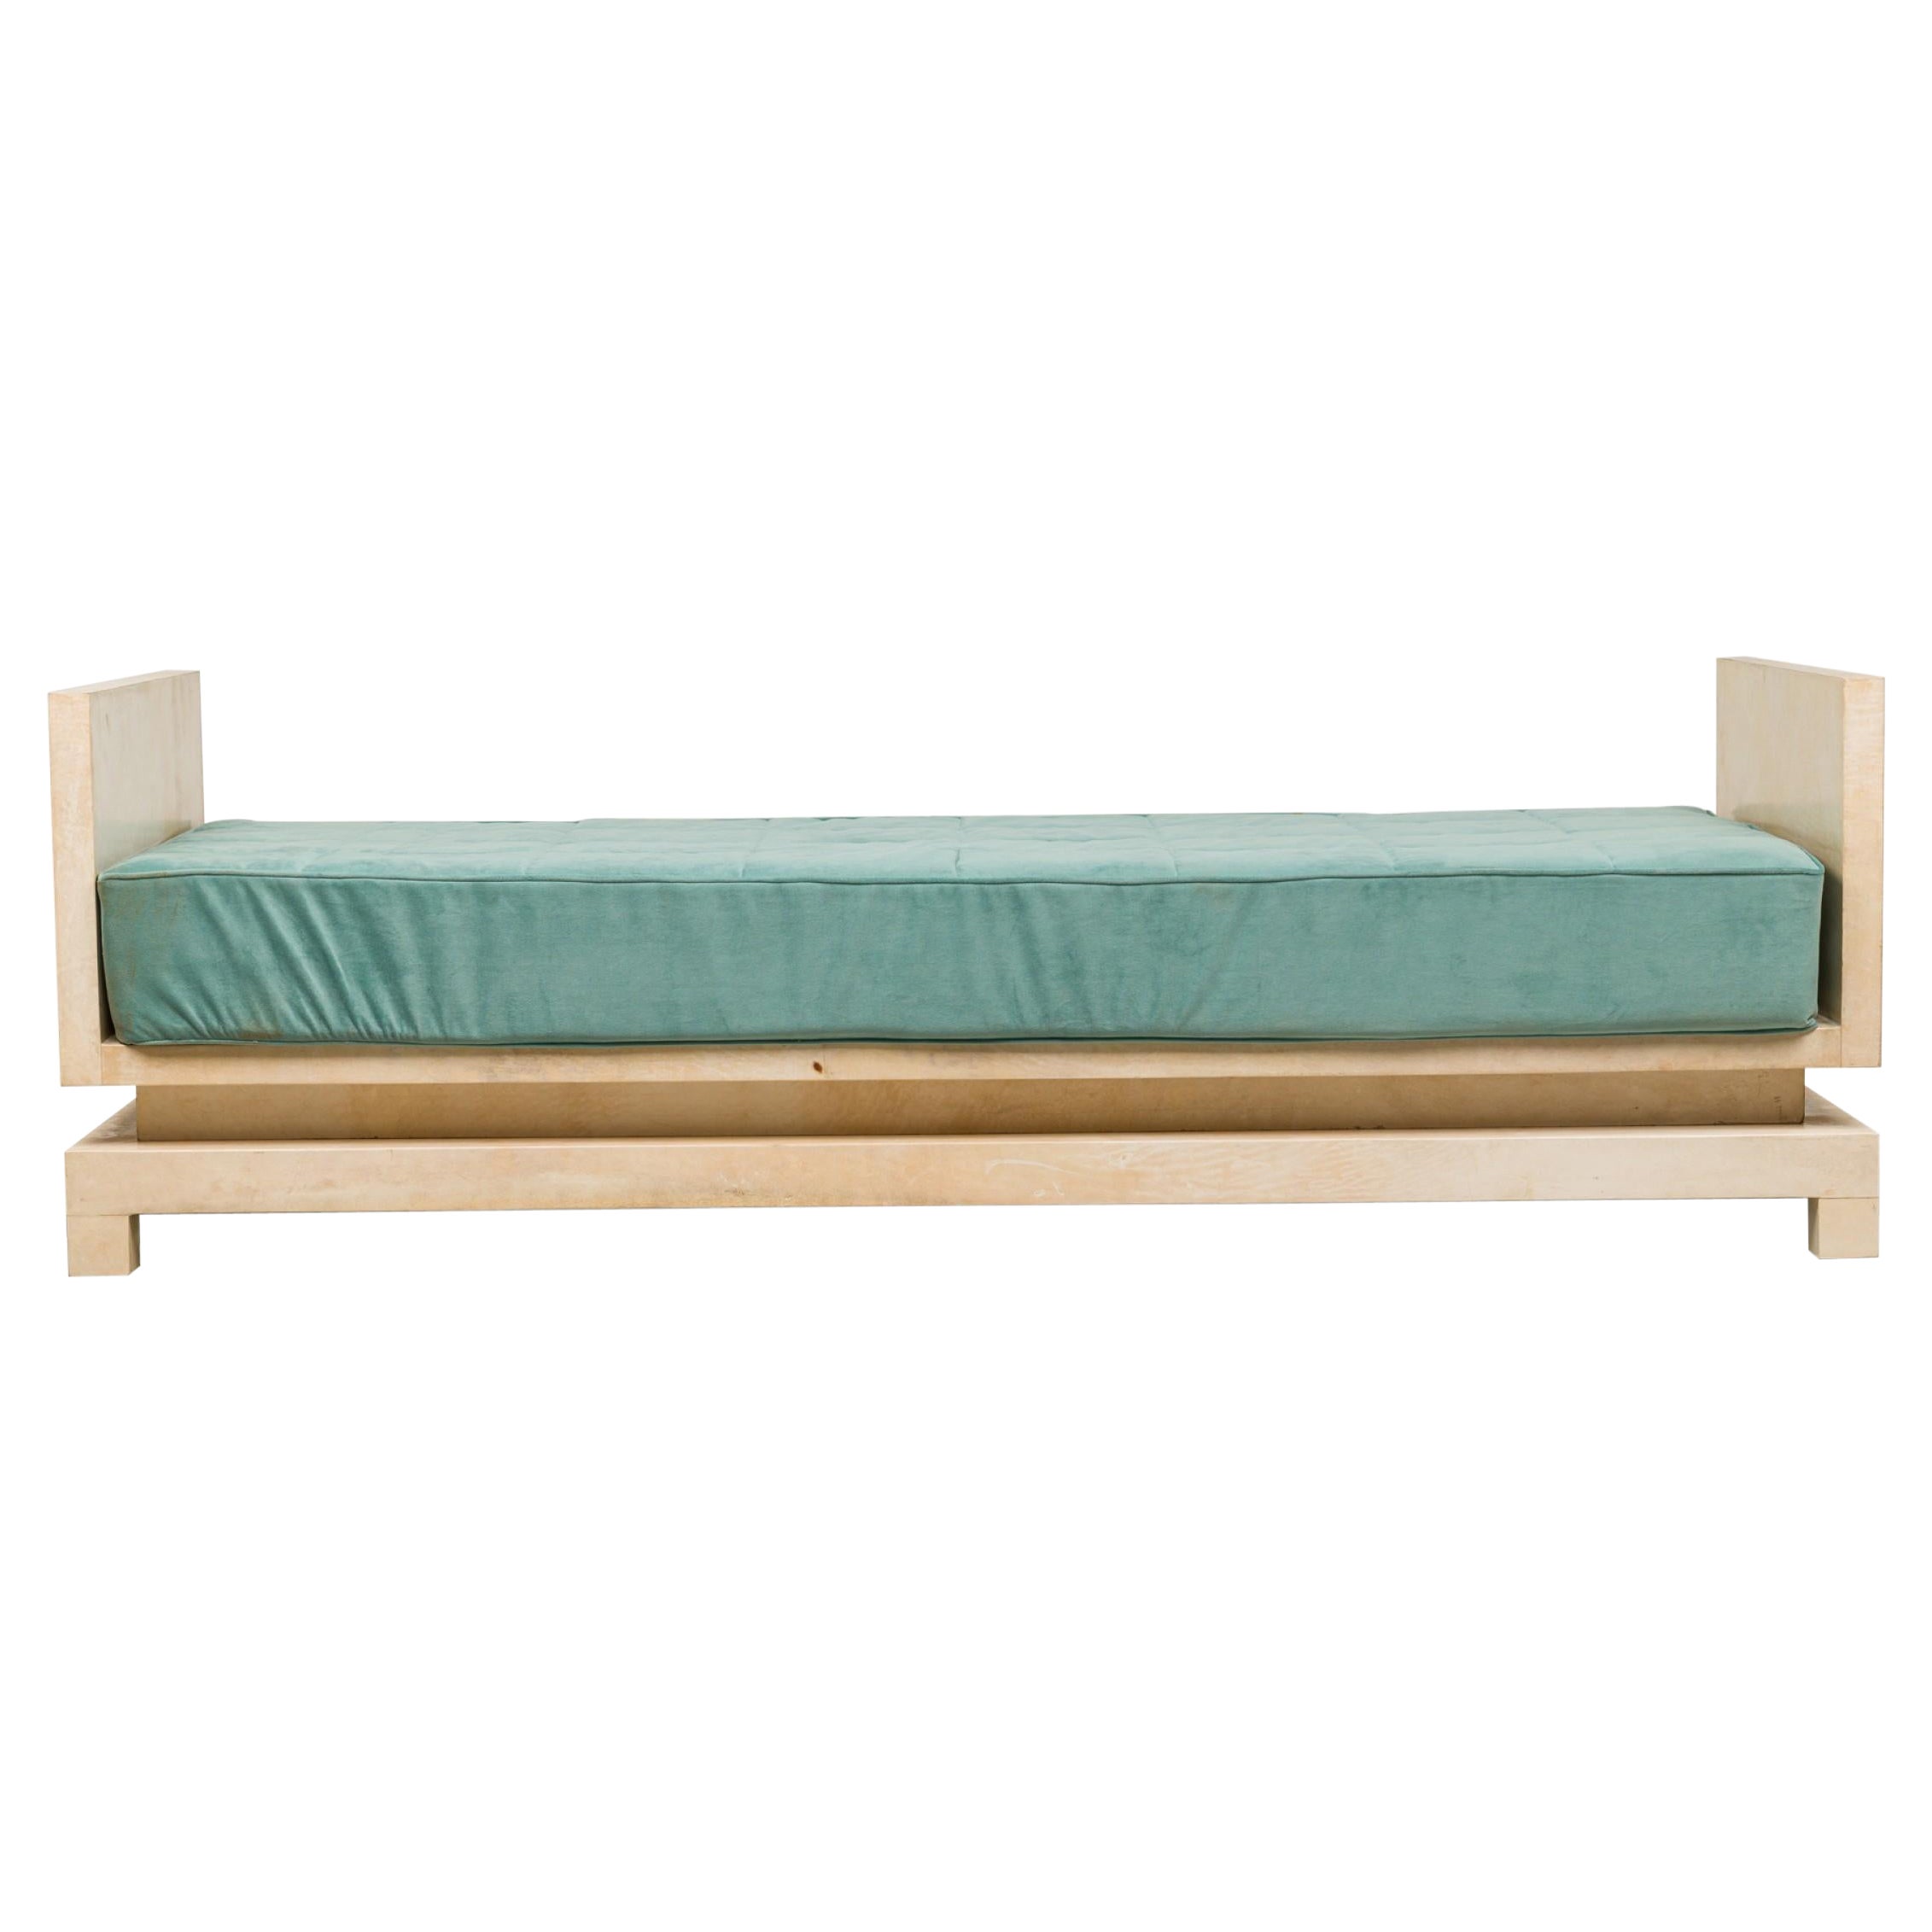 Mid-Century American Parchment and Teal Upholstered Daybed Manner of Samuel Marx